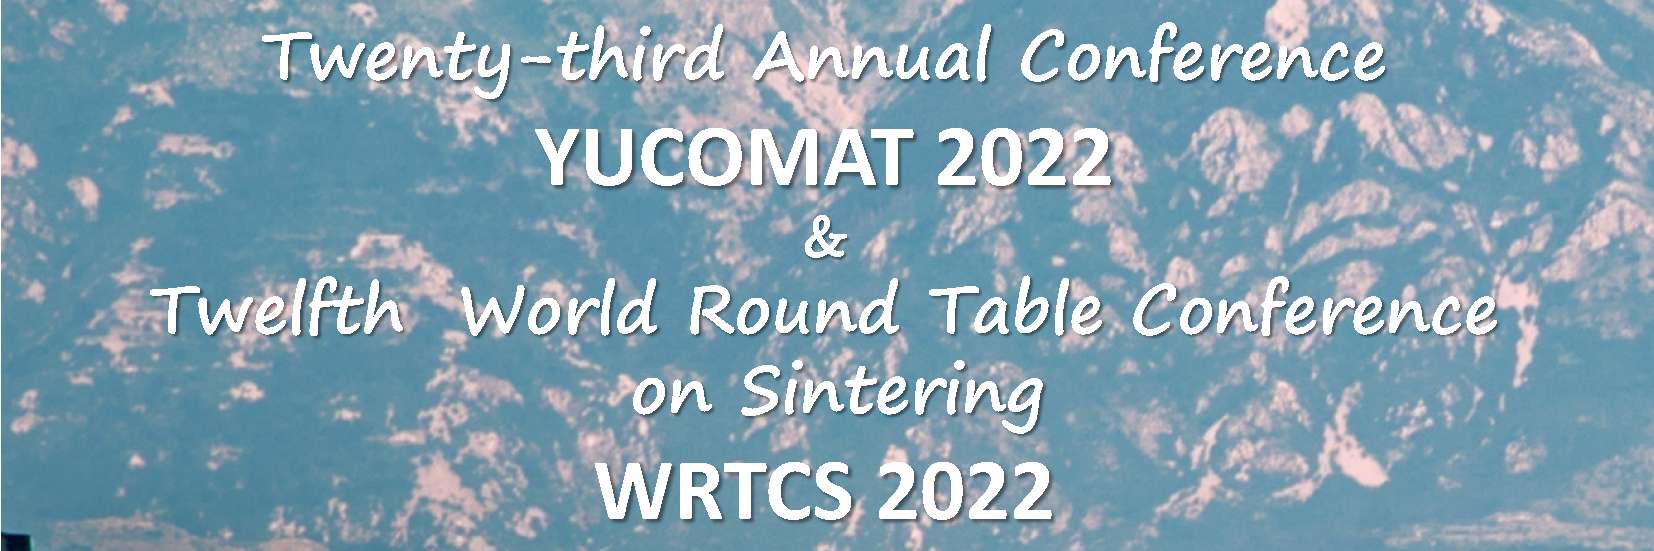 Professor Yury Gogotsi Participating in YUCOMAT 2022 as the Chair of the Scientific Committee and Plenary Speaker